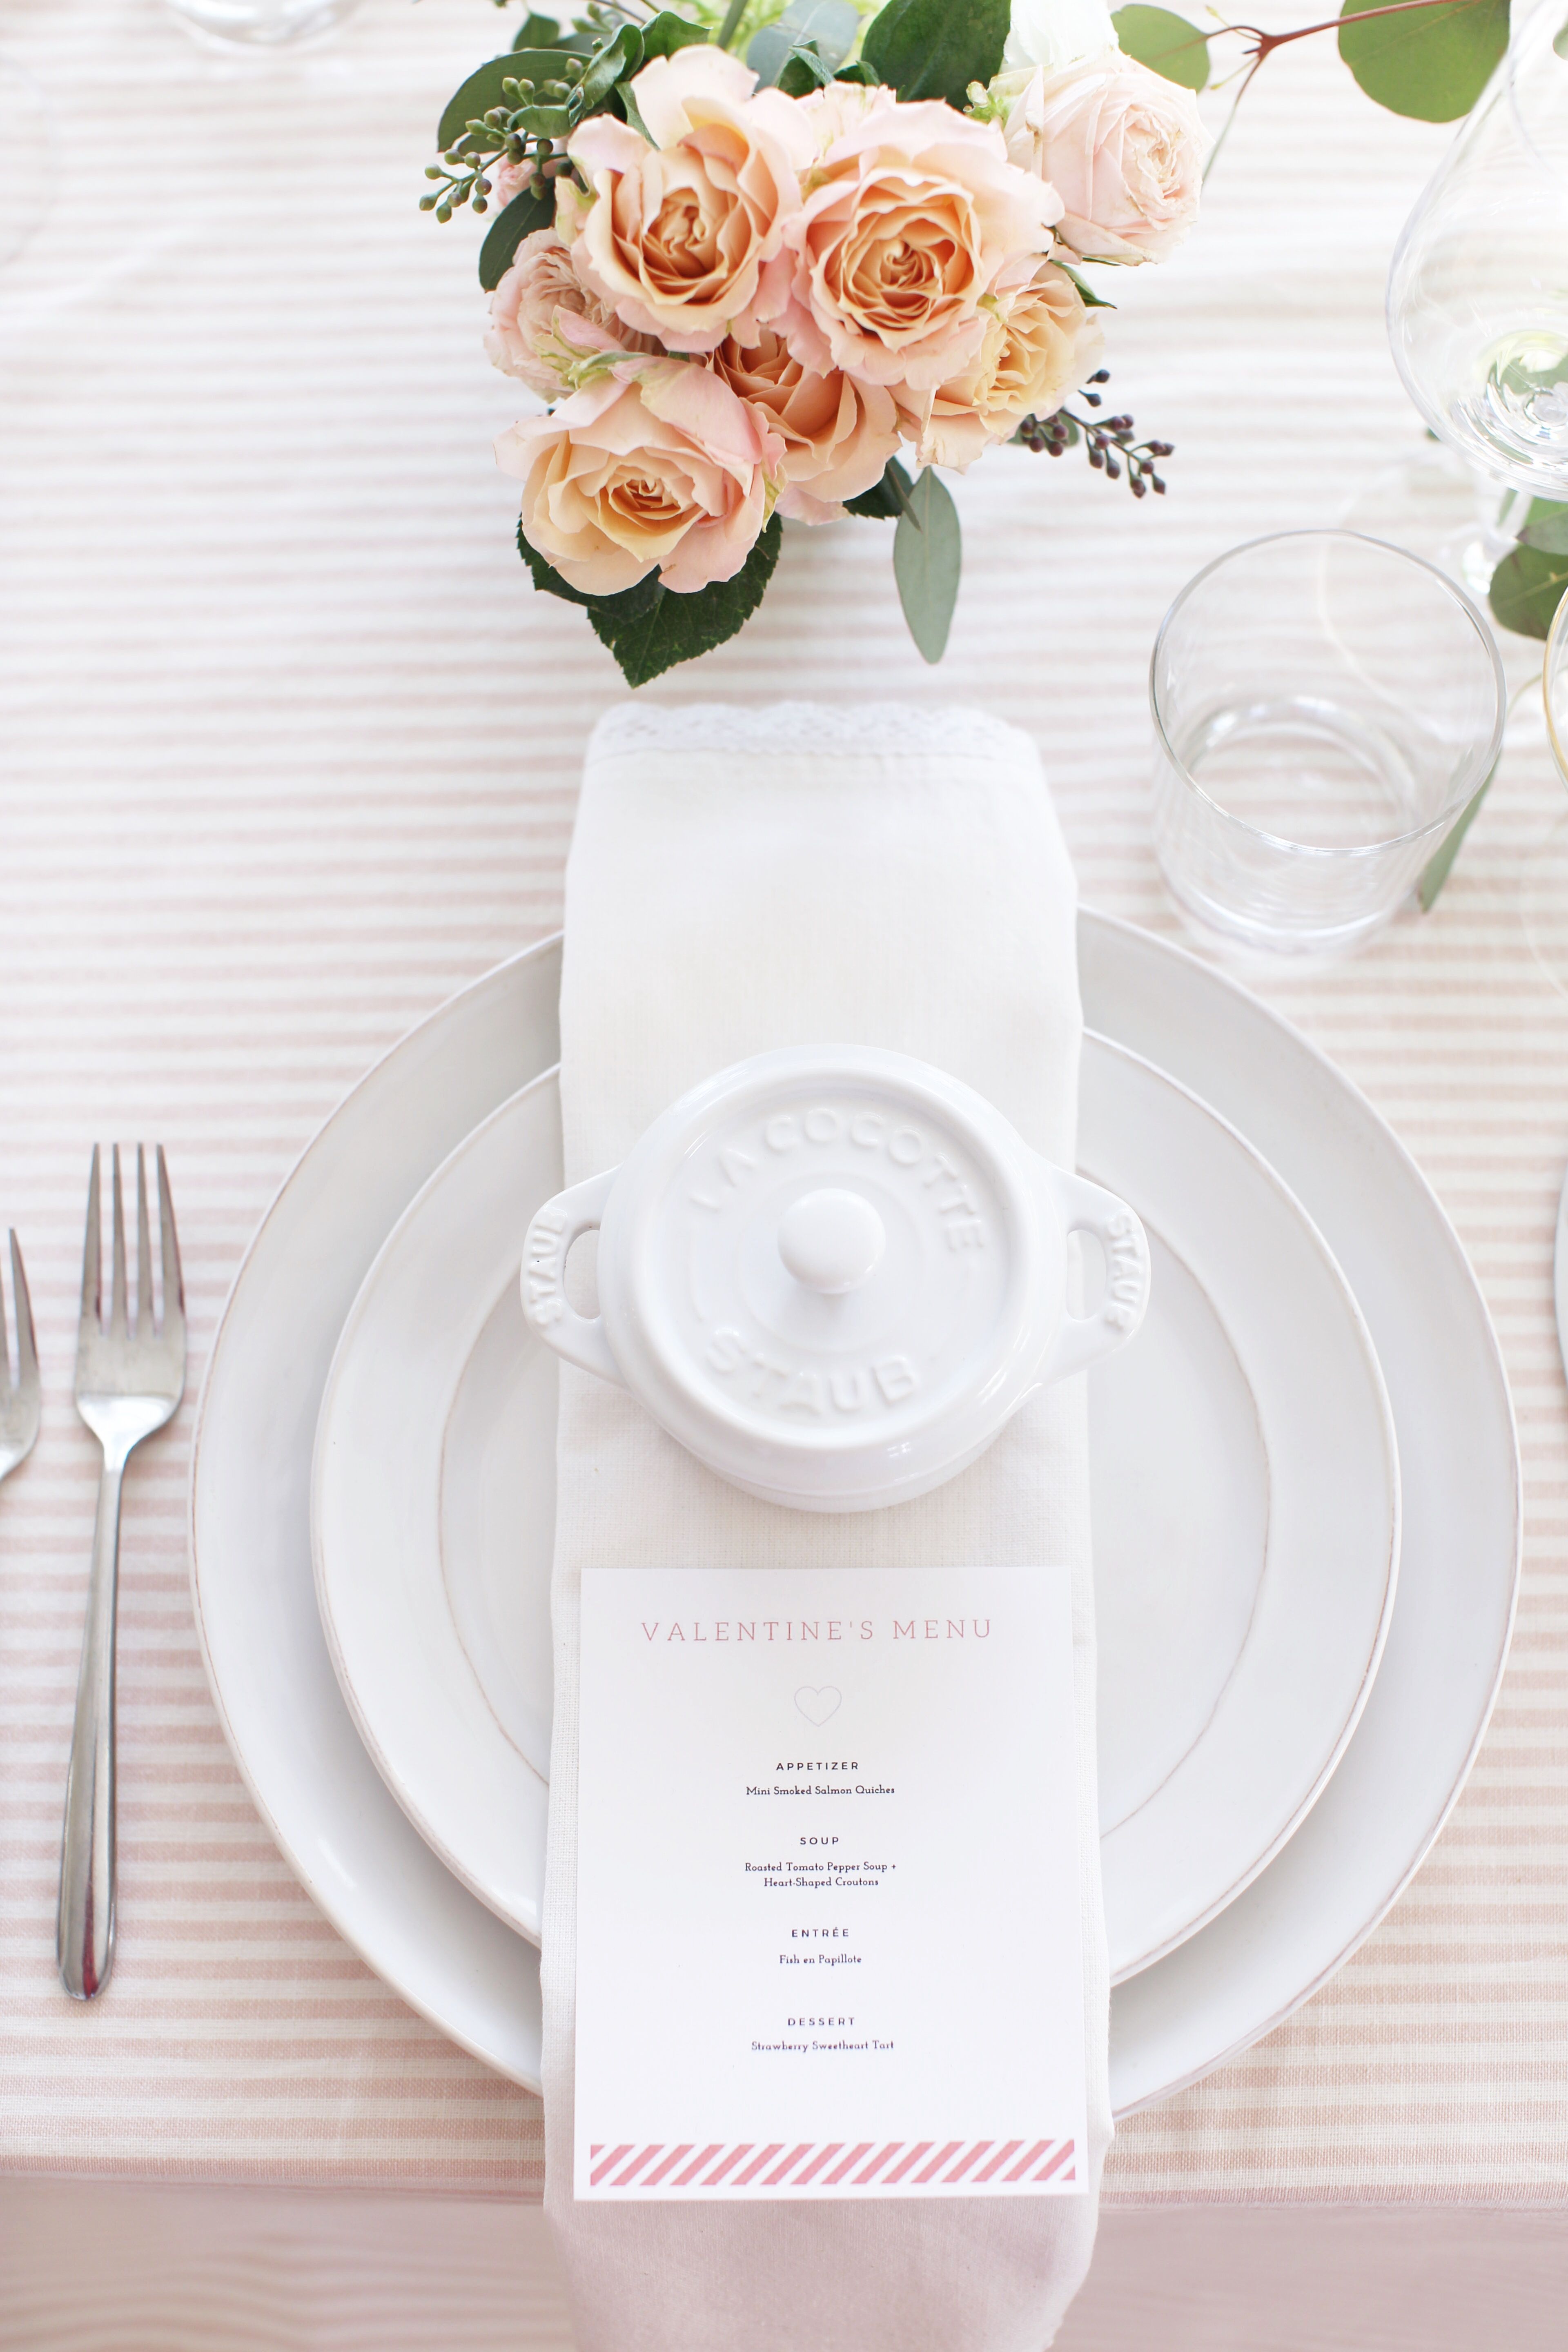 Fraiche Table Series: A complete guide to entertaining for Valentine's Day including a perfectly designed printable menu, table setting suggestions, what to wear and a workbook schedule that will keep you on track and totally prepared!